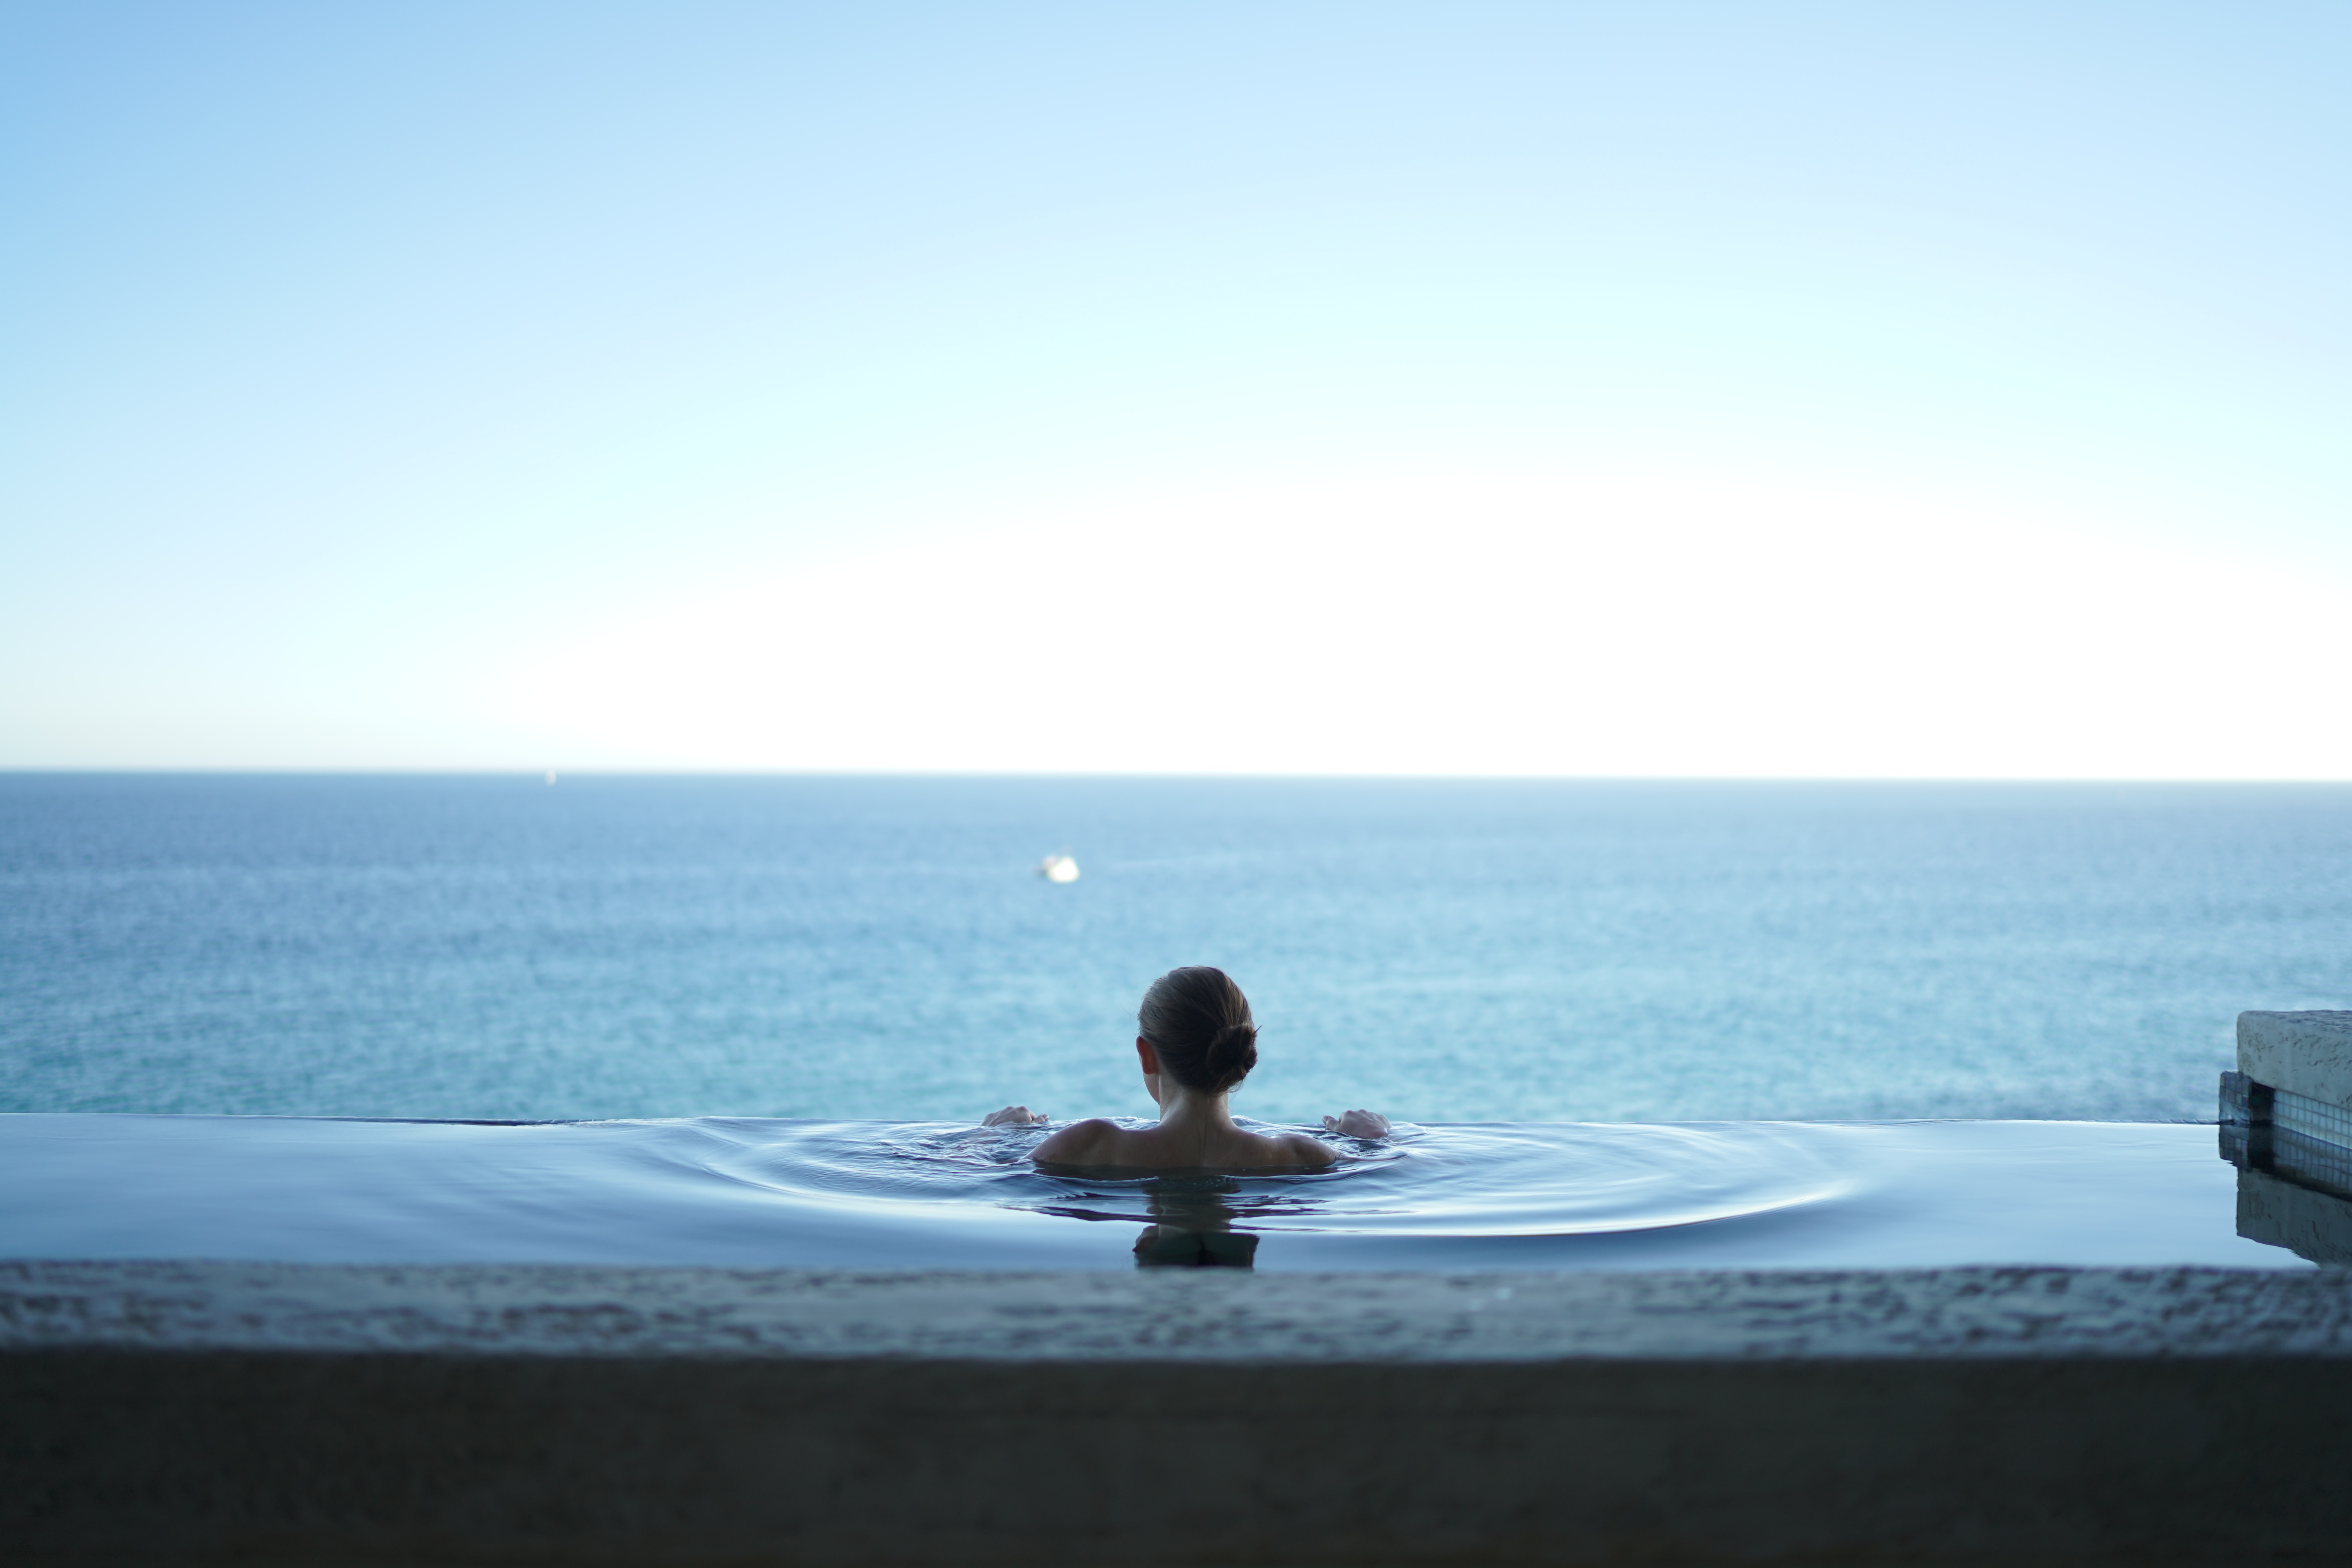 A lady immersed in an infinity pool, an infinite expanse of water.